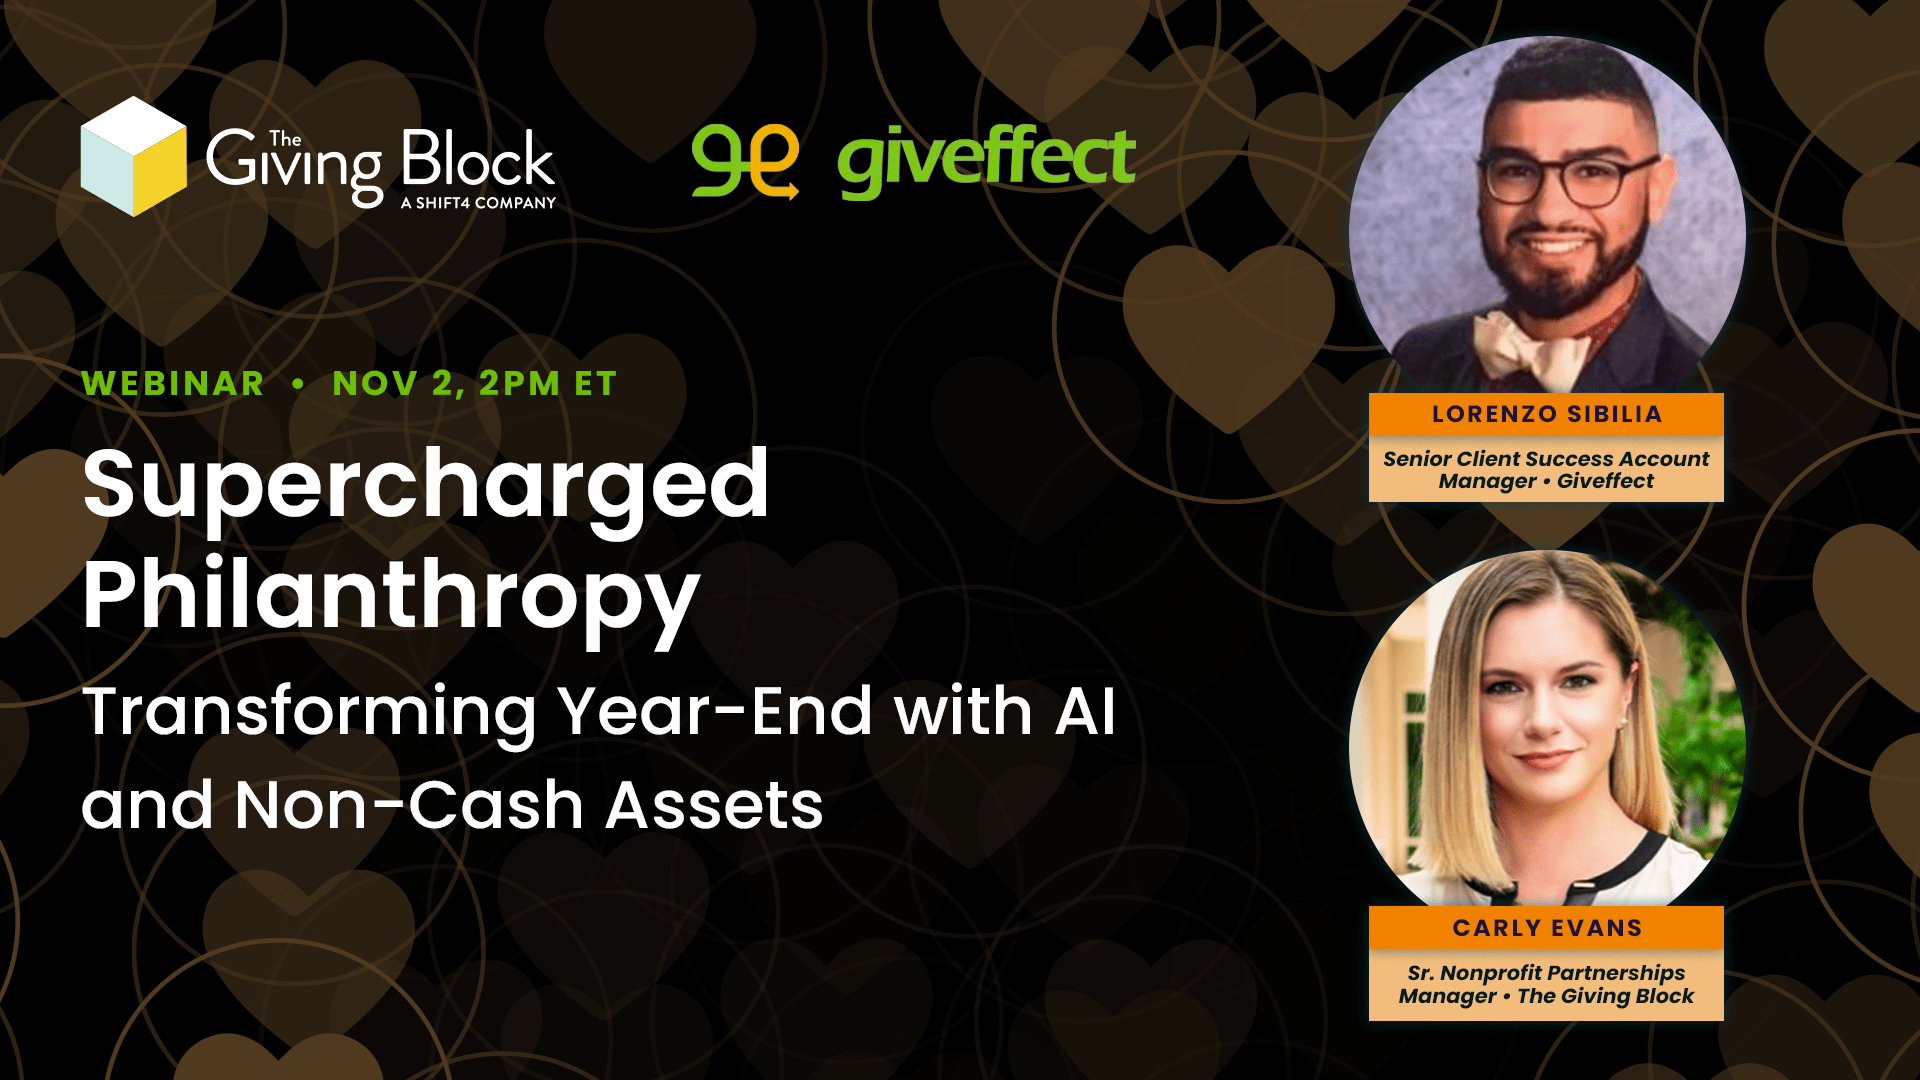 Supercharged Philanthropy Transforming Year-End with AI & Non-Cash Assets - EVENT | The Giving Block